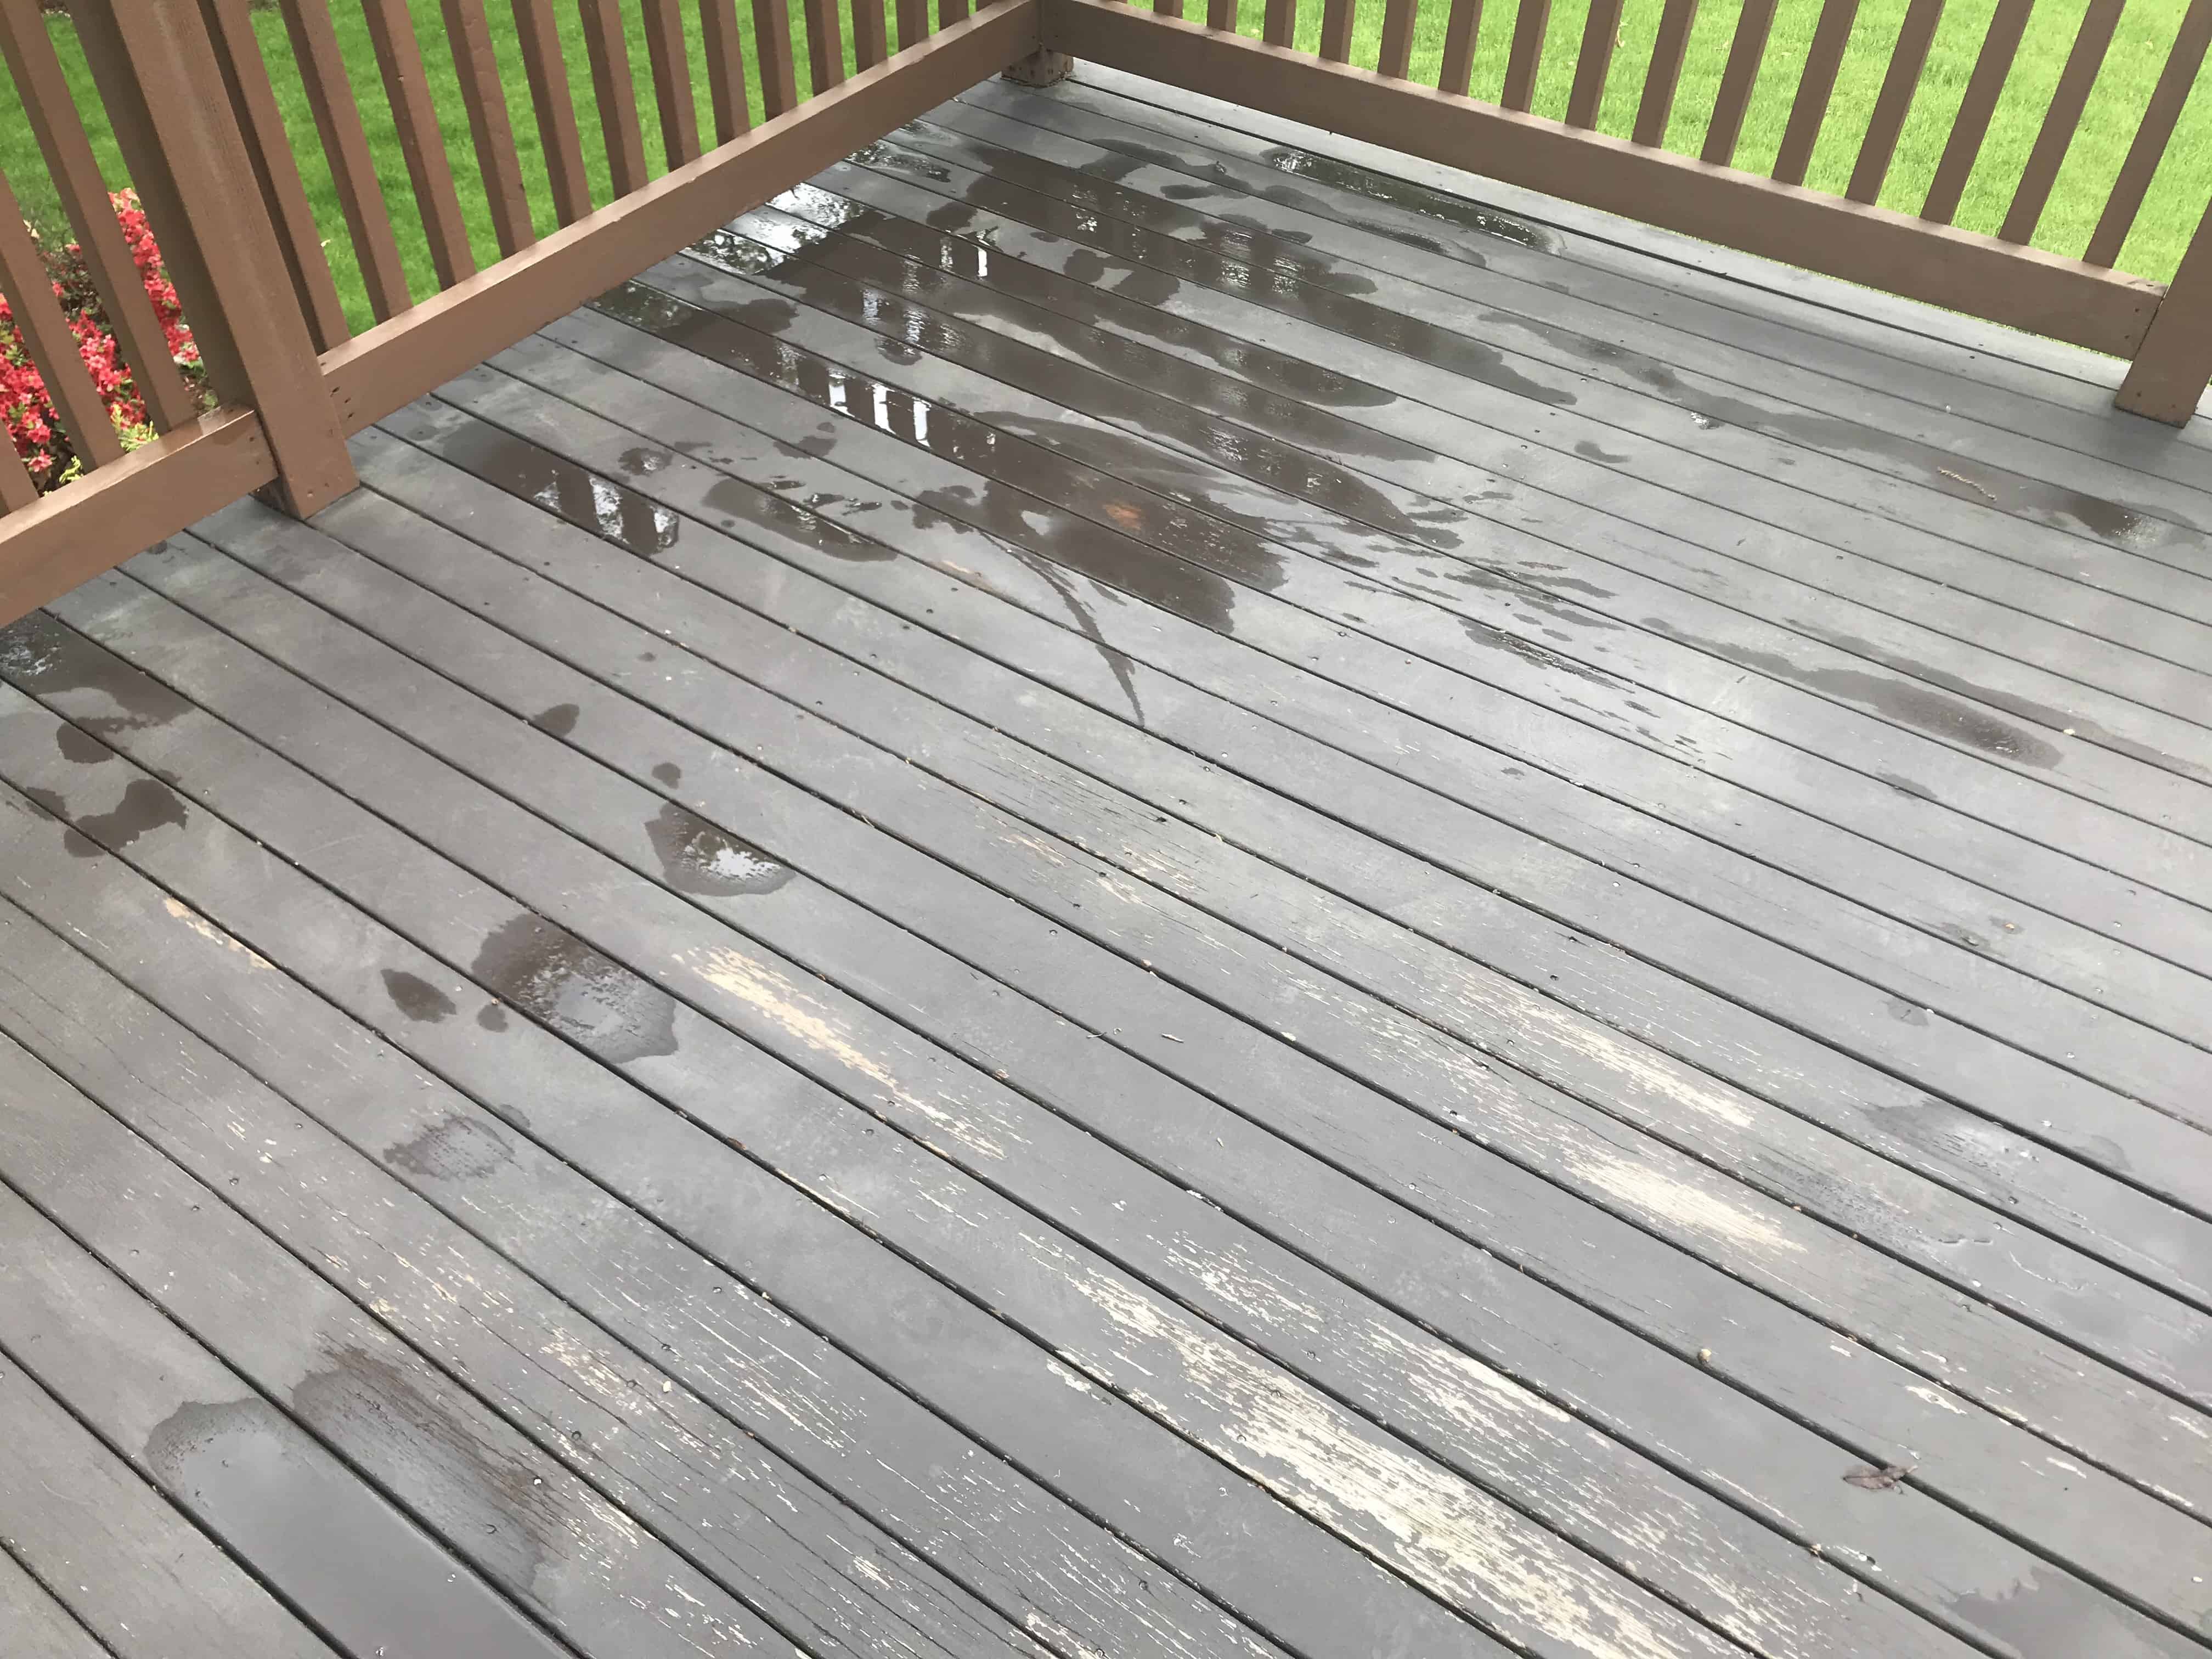 deck with peeling and chipping paint